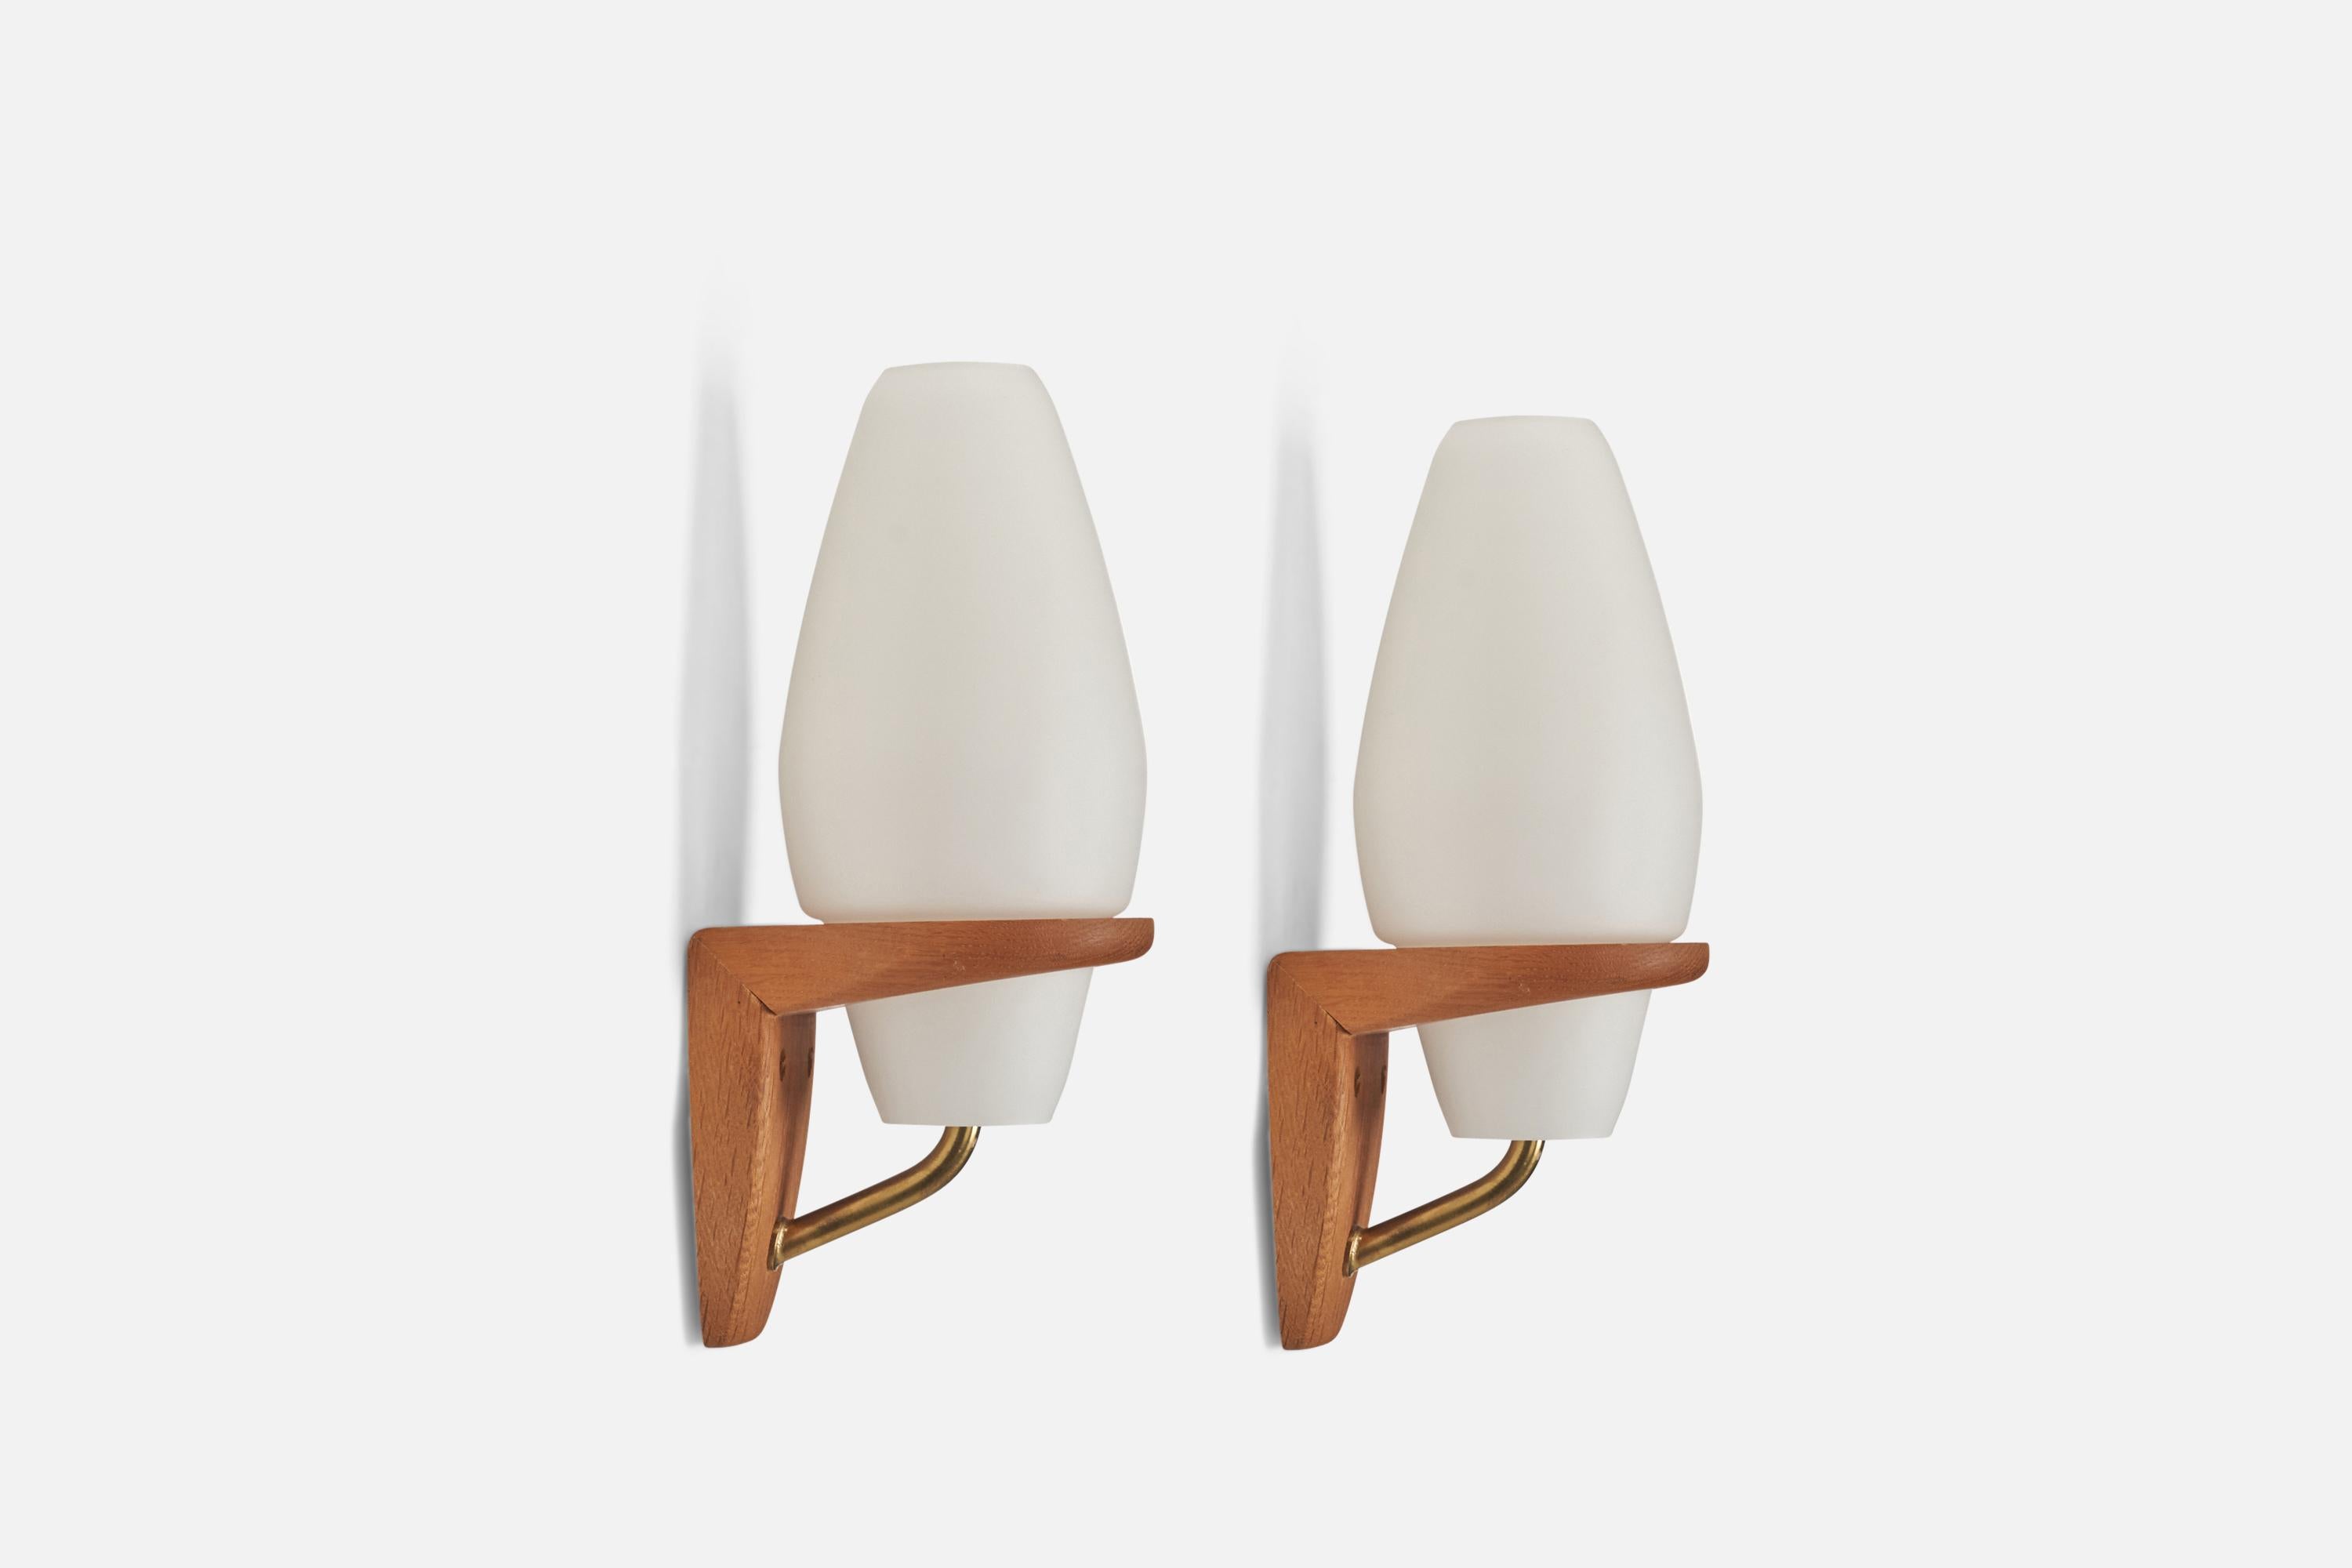 A pair of brass, oak and milk glass wall lights designed and produced by a Swedish Designer, Sweden, 1950s.